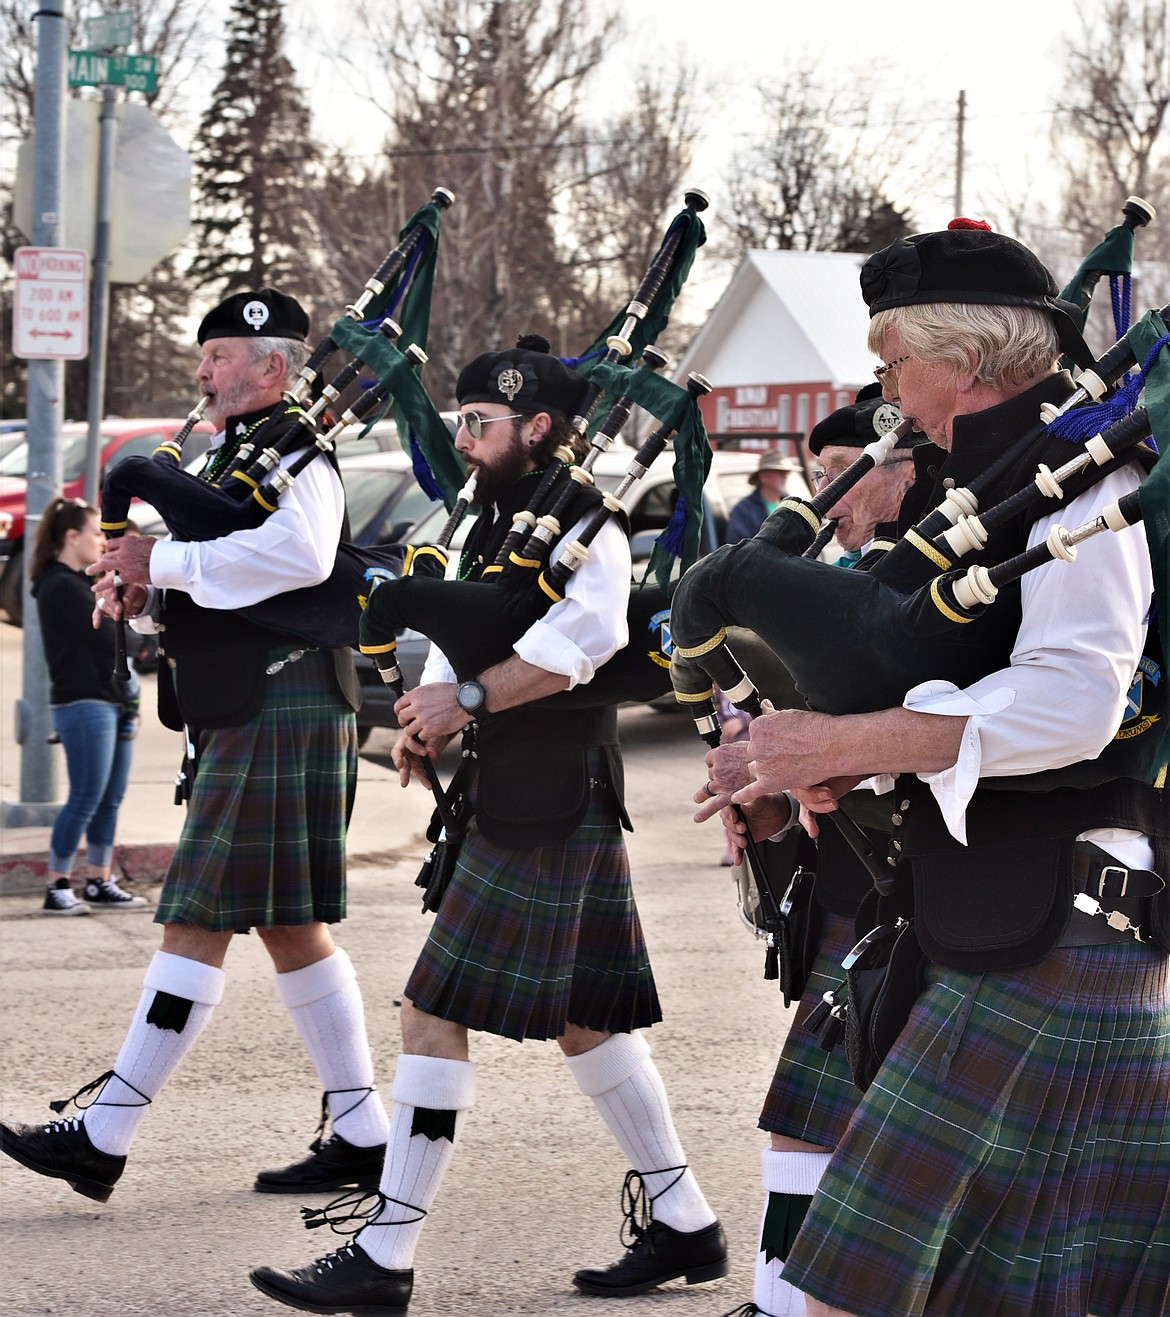 Members of the Great Scots Pipes and Drums Band, from left: John Hamilton, Johnny Hamilton, John Borne and Dick Bratton. (Scot Heisel/Lake County Leader)